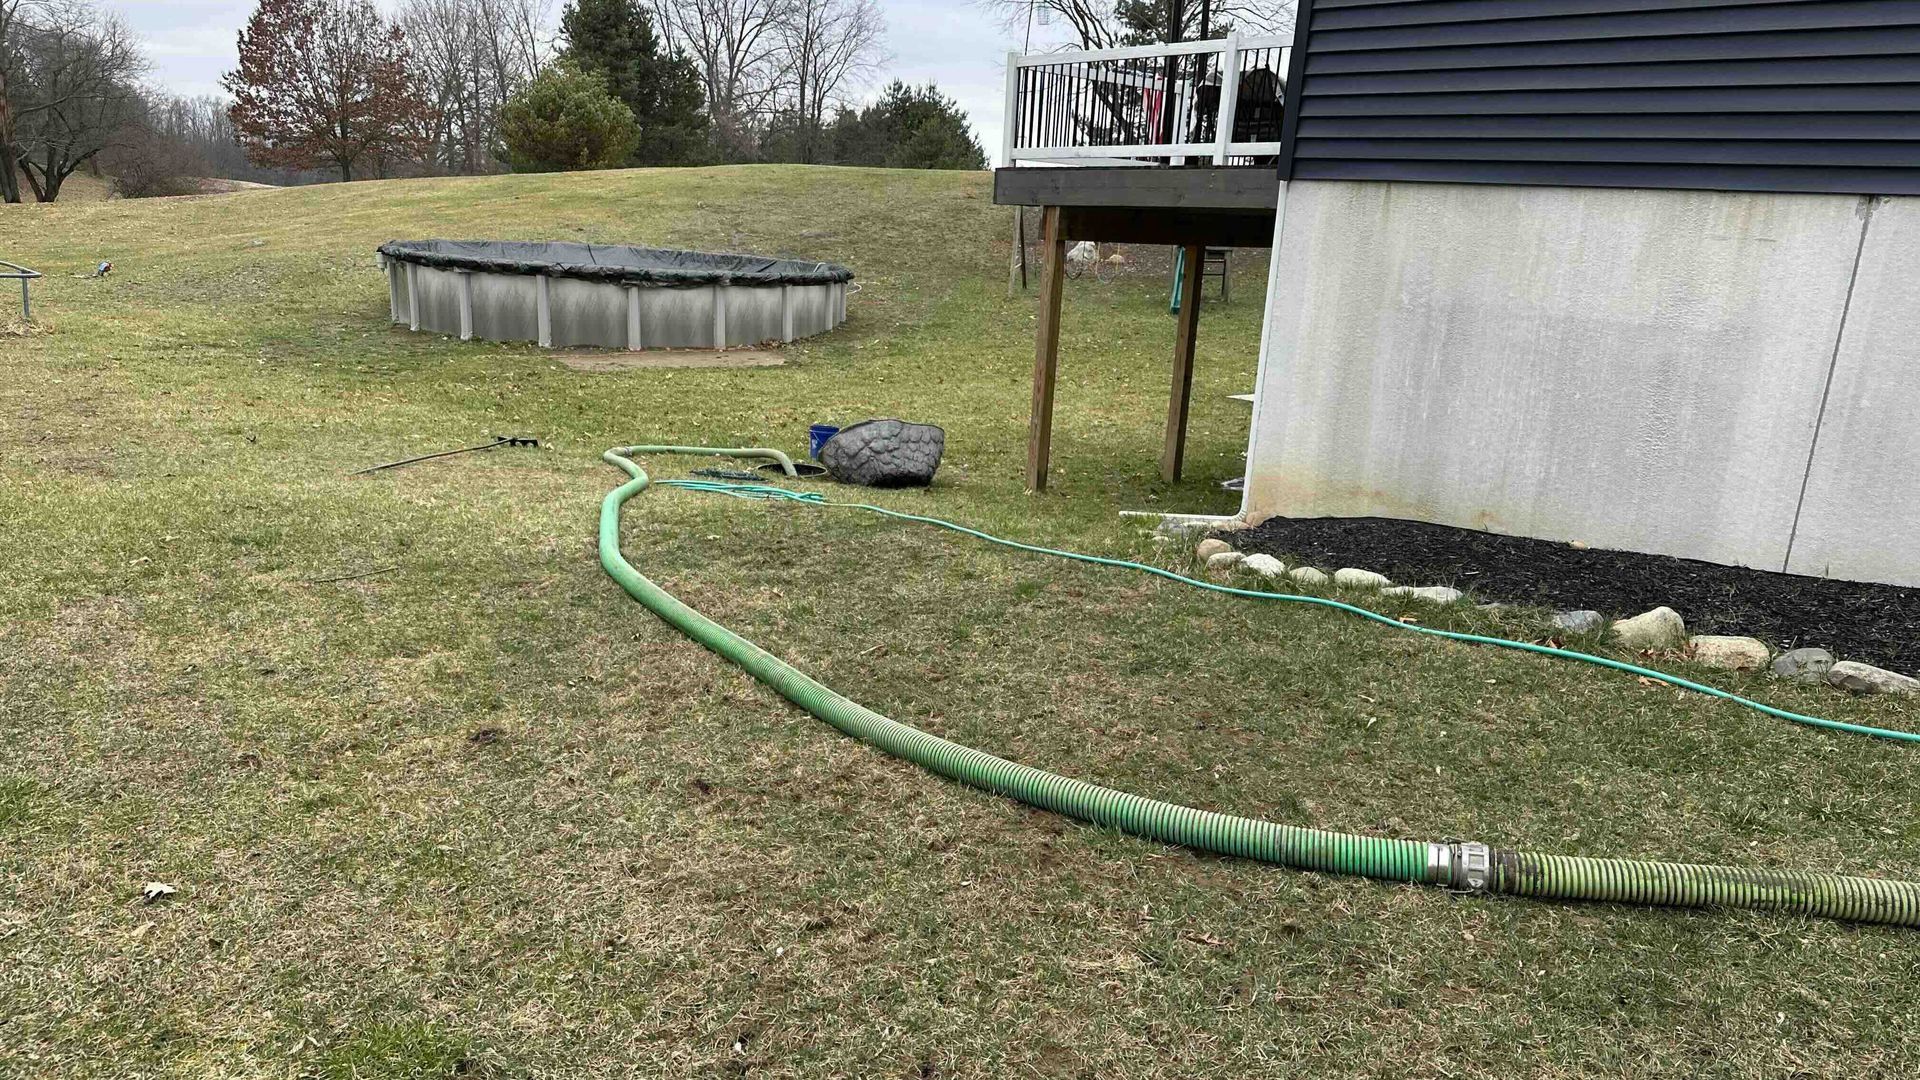 A green hose is pumping a septic tank that is located by a pool in a backyard.